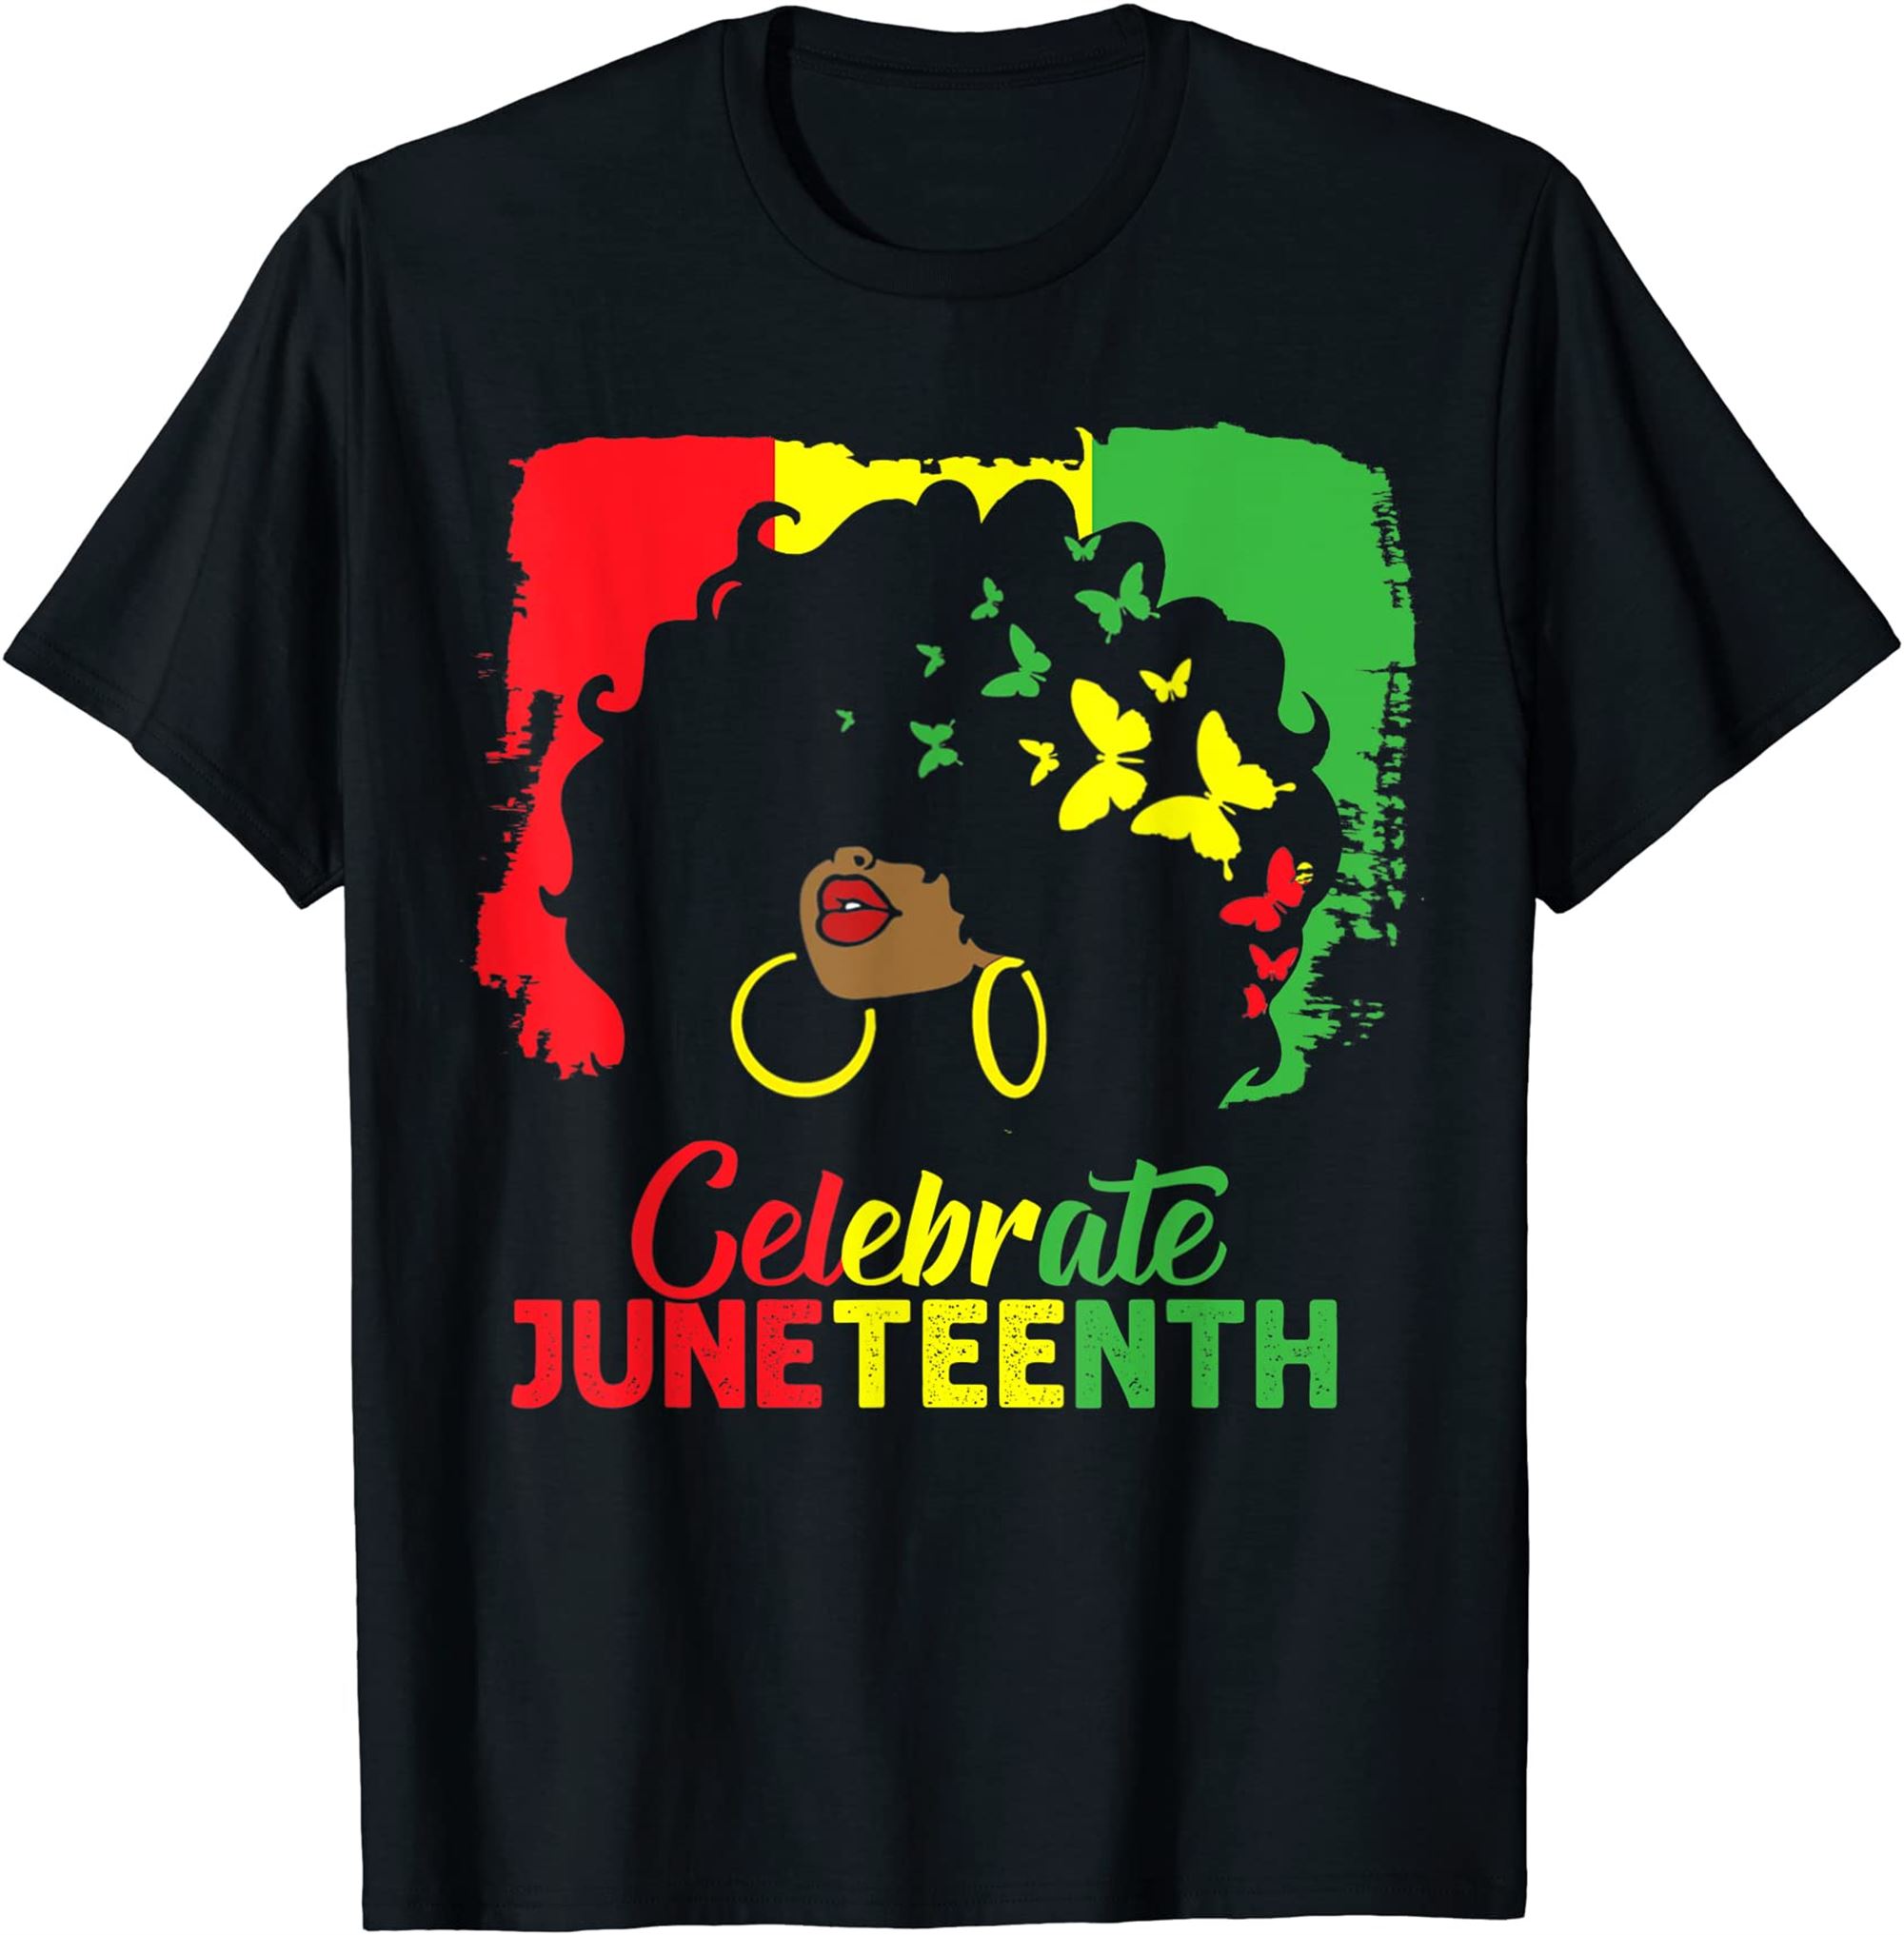 Black Women Messy Bun Juneteenth Celebrate Indepedence Day T-shirt Full Size Up To 5xl